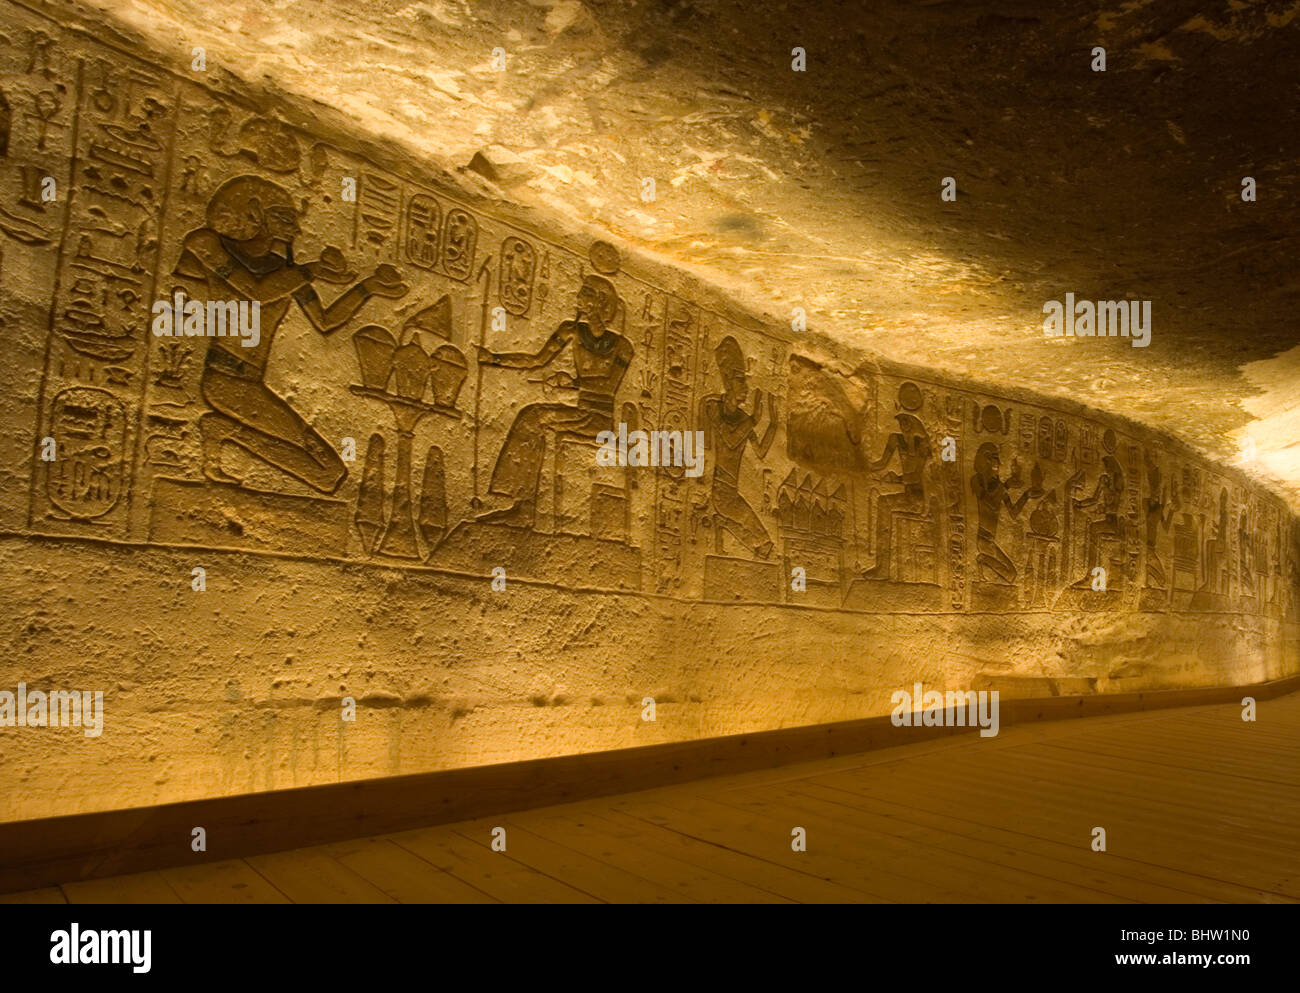 Wall with carvings inside the great temple of Abu Simbel in Egypt. Stock Photo